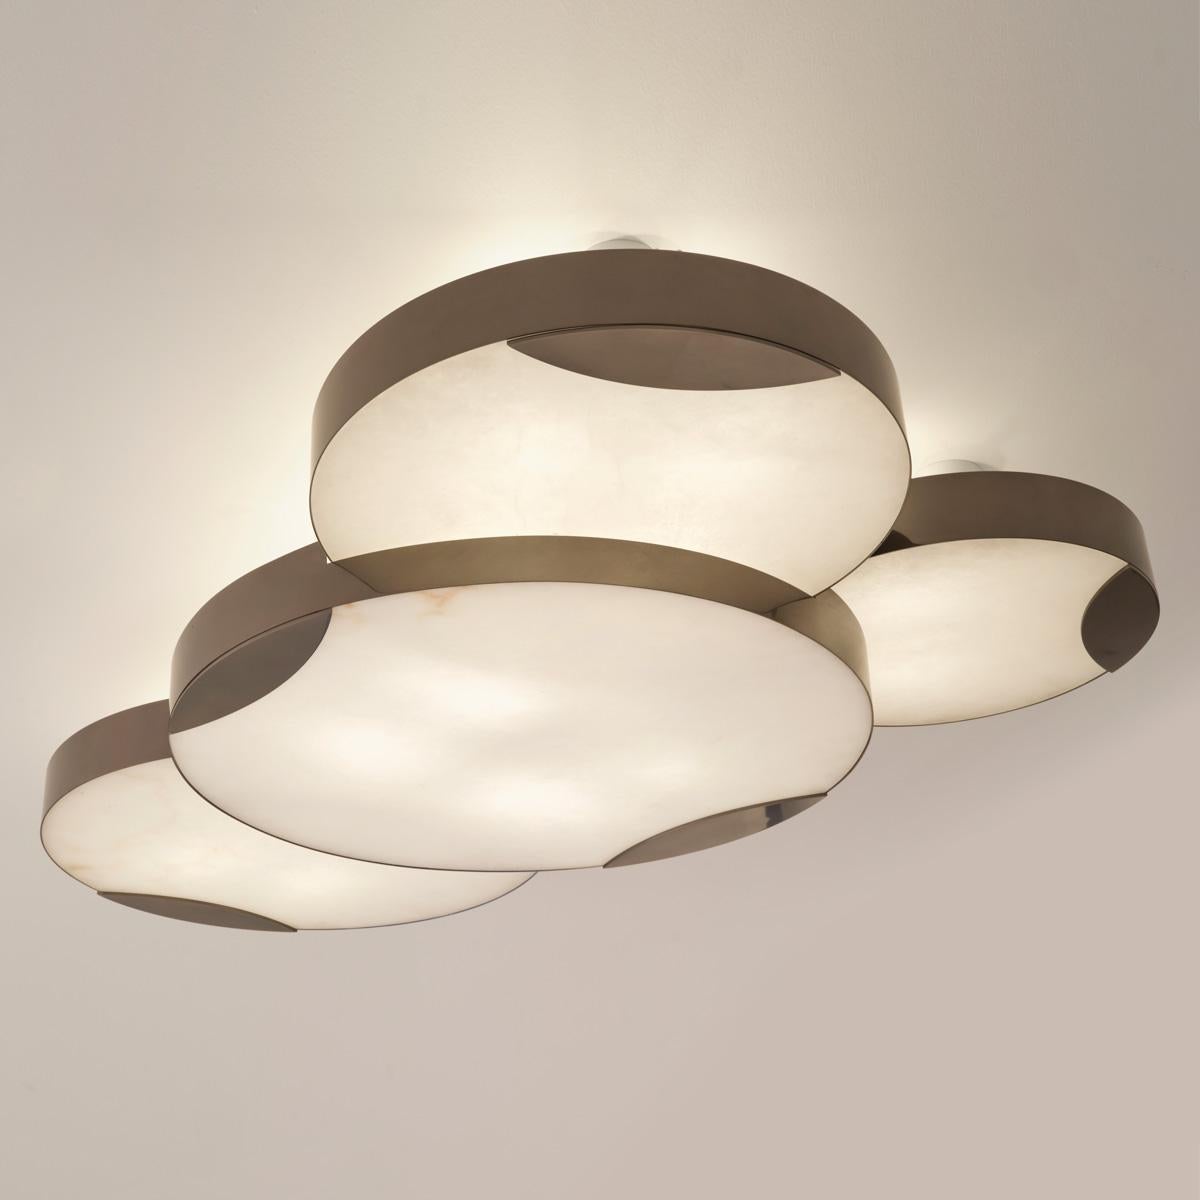 Modern Cloud N.4 Ceiling Light by Gaspare Asaro-Peltro Finish For Sale